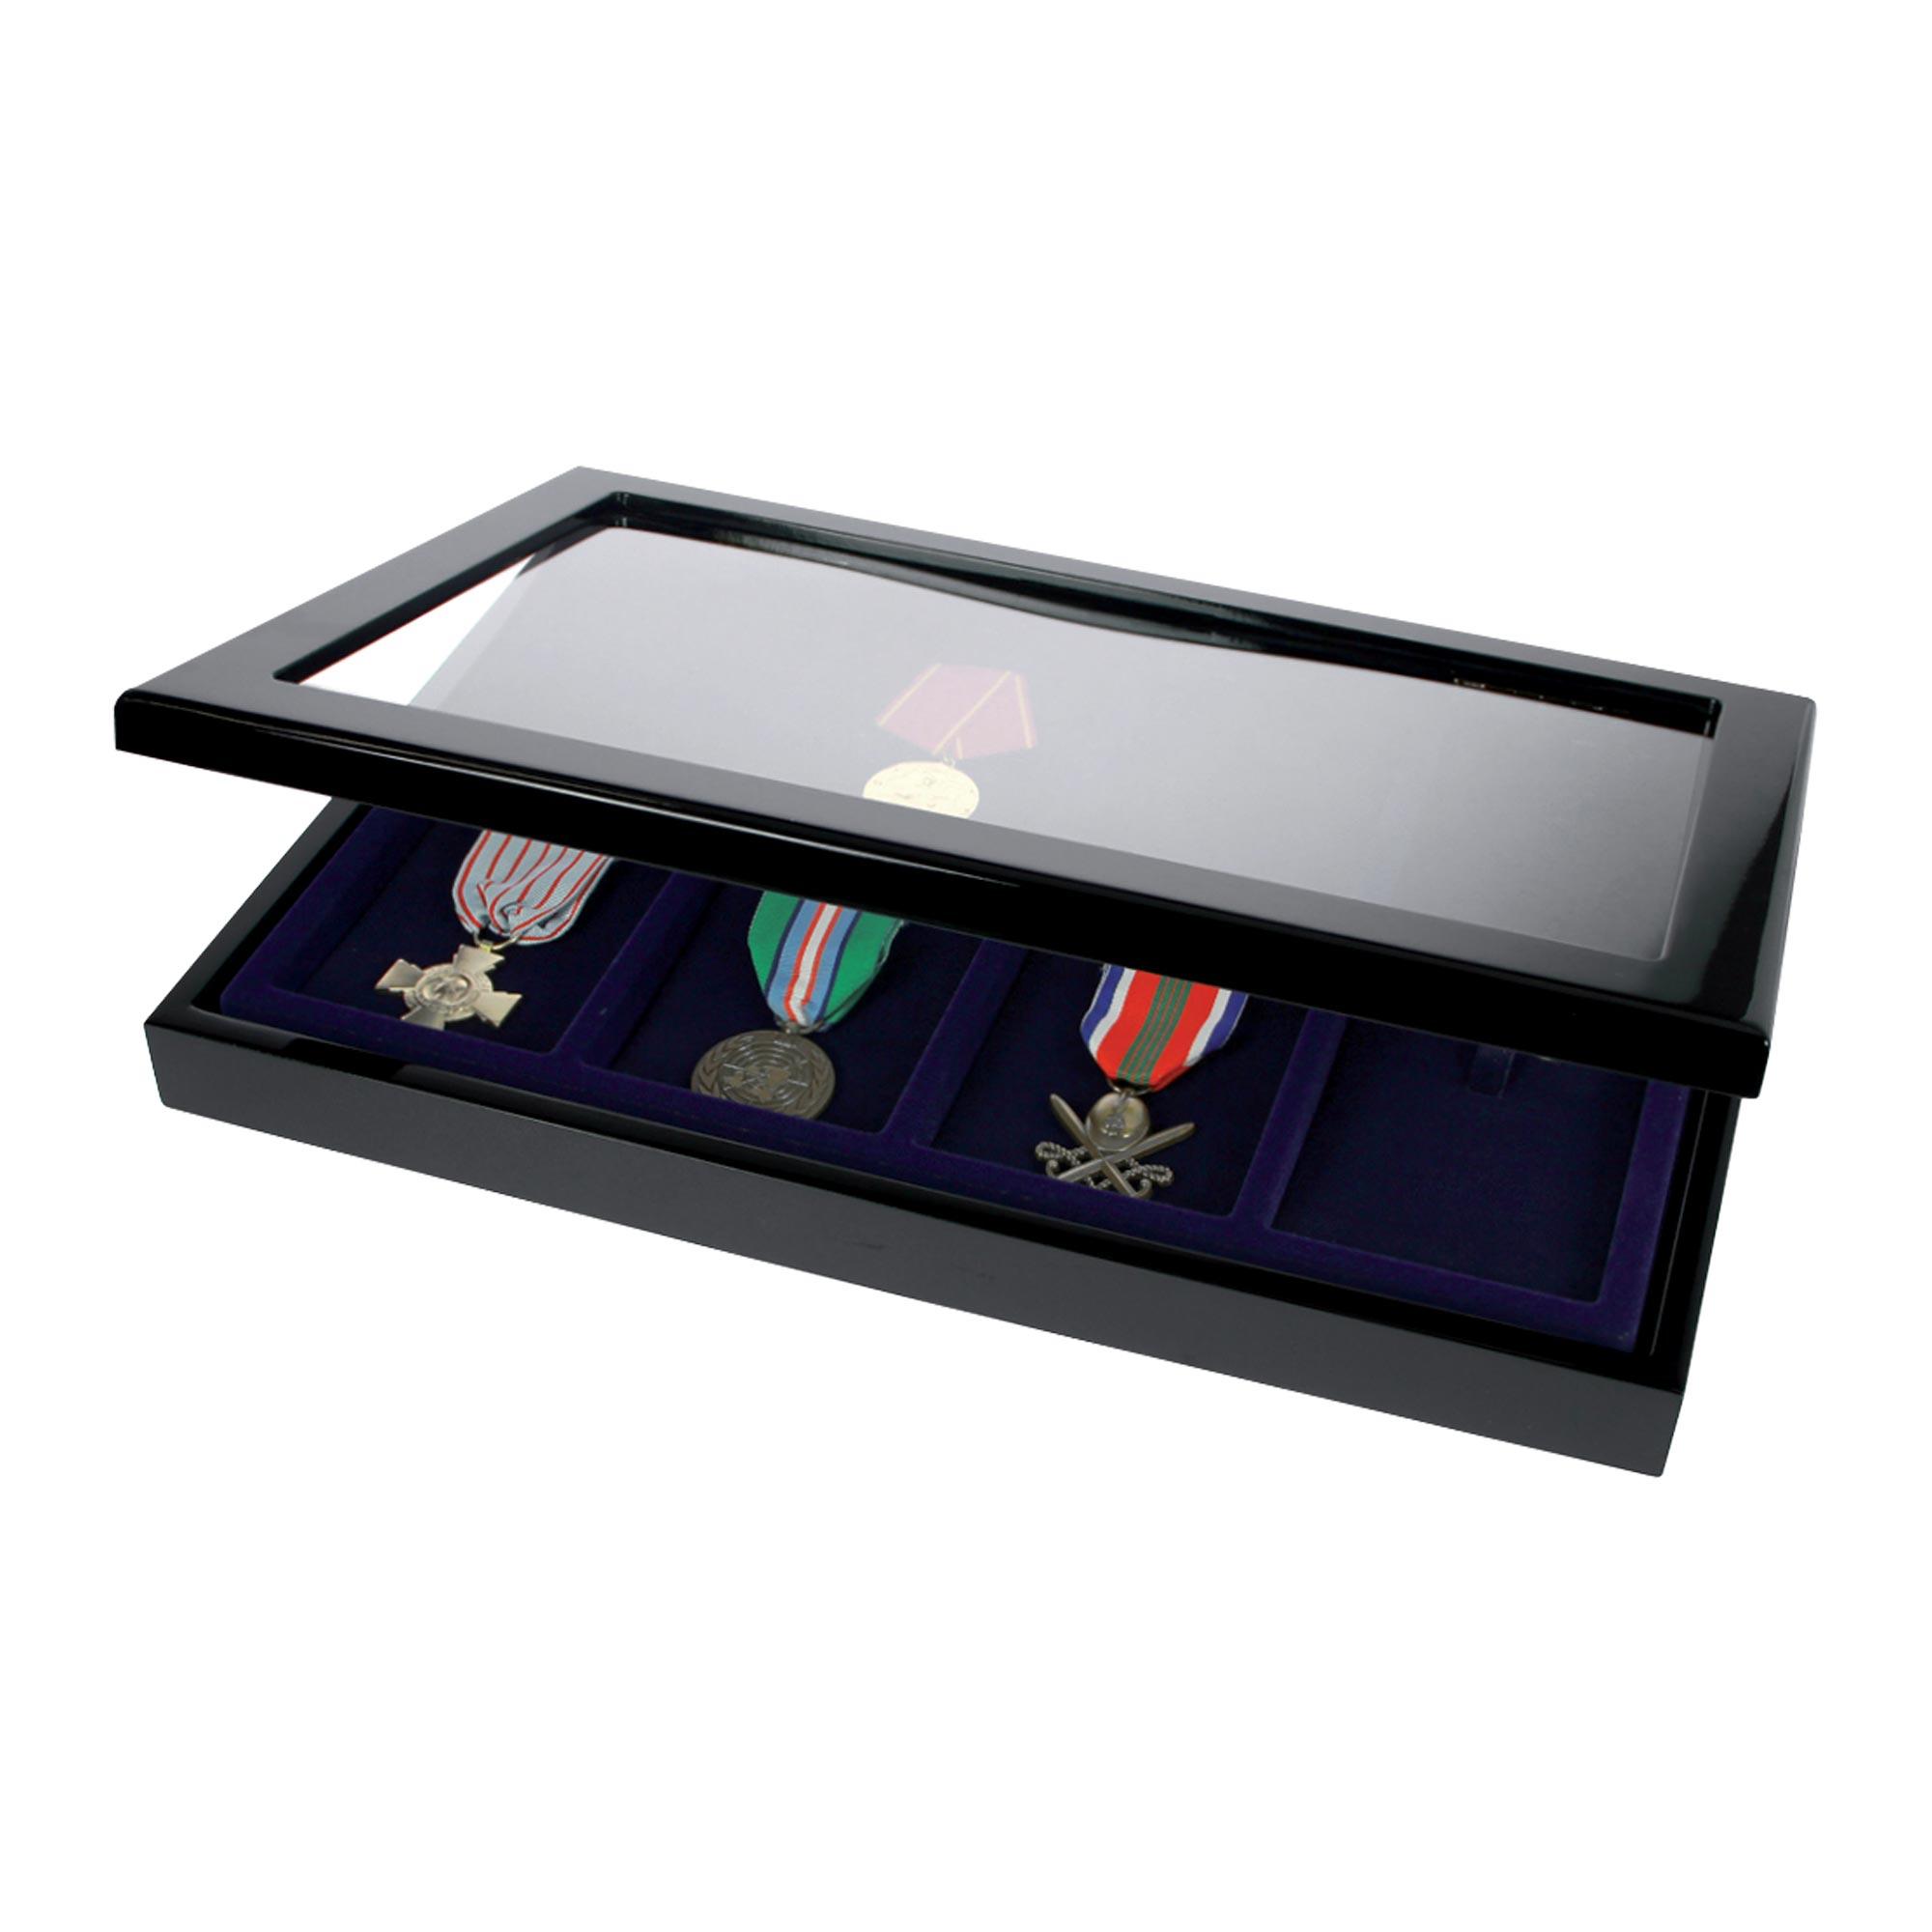 Black Gloss Finish Wooden Showcase for 8 Medals